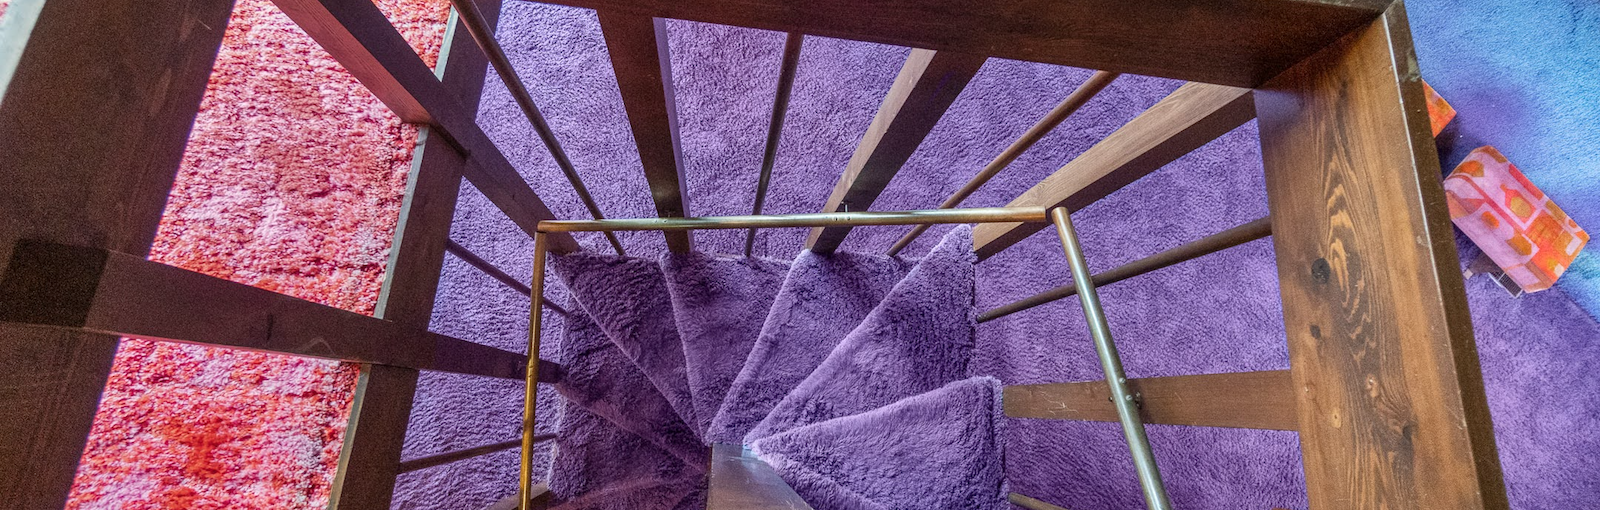 The psychedelic staircase of a viral 1970s time capsule home in Fort Wayne that's going from shag to chic.